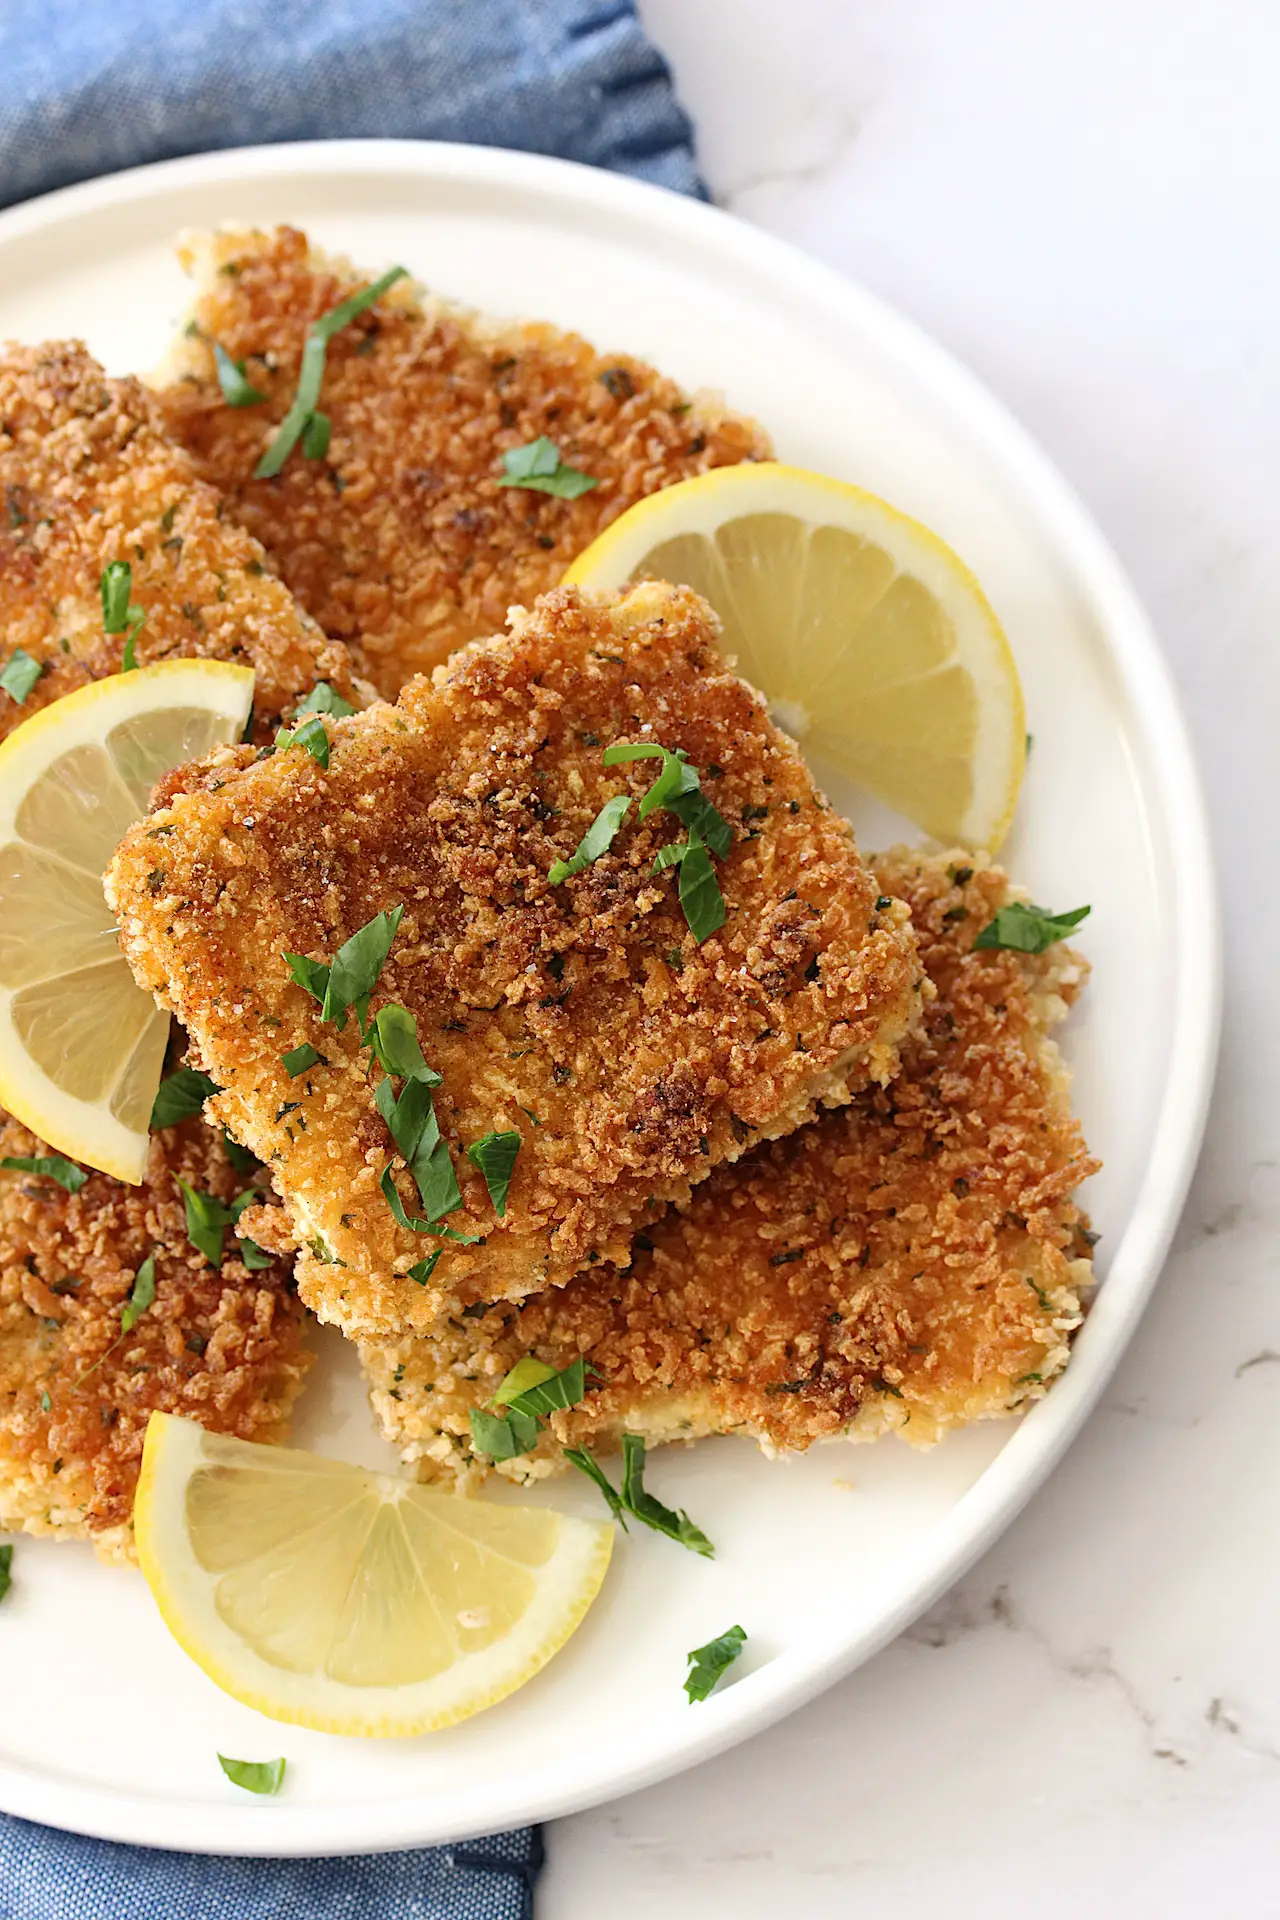 Vegan gluten-free tofu schnitzel on a plate with parsley and slices of lemon